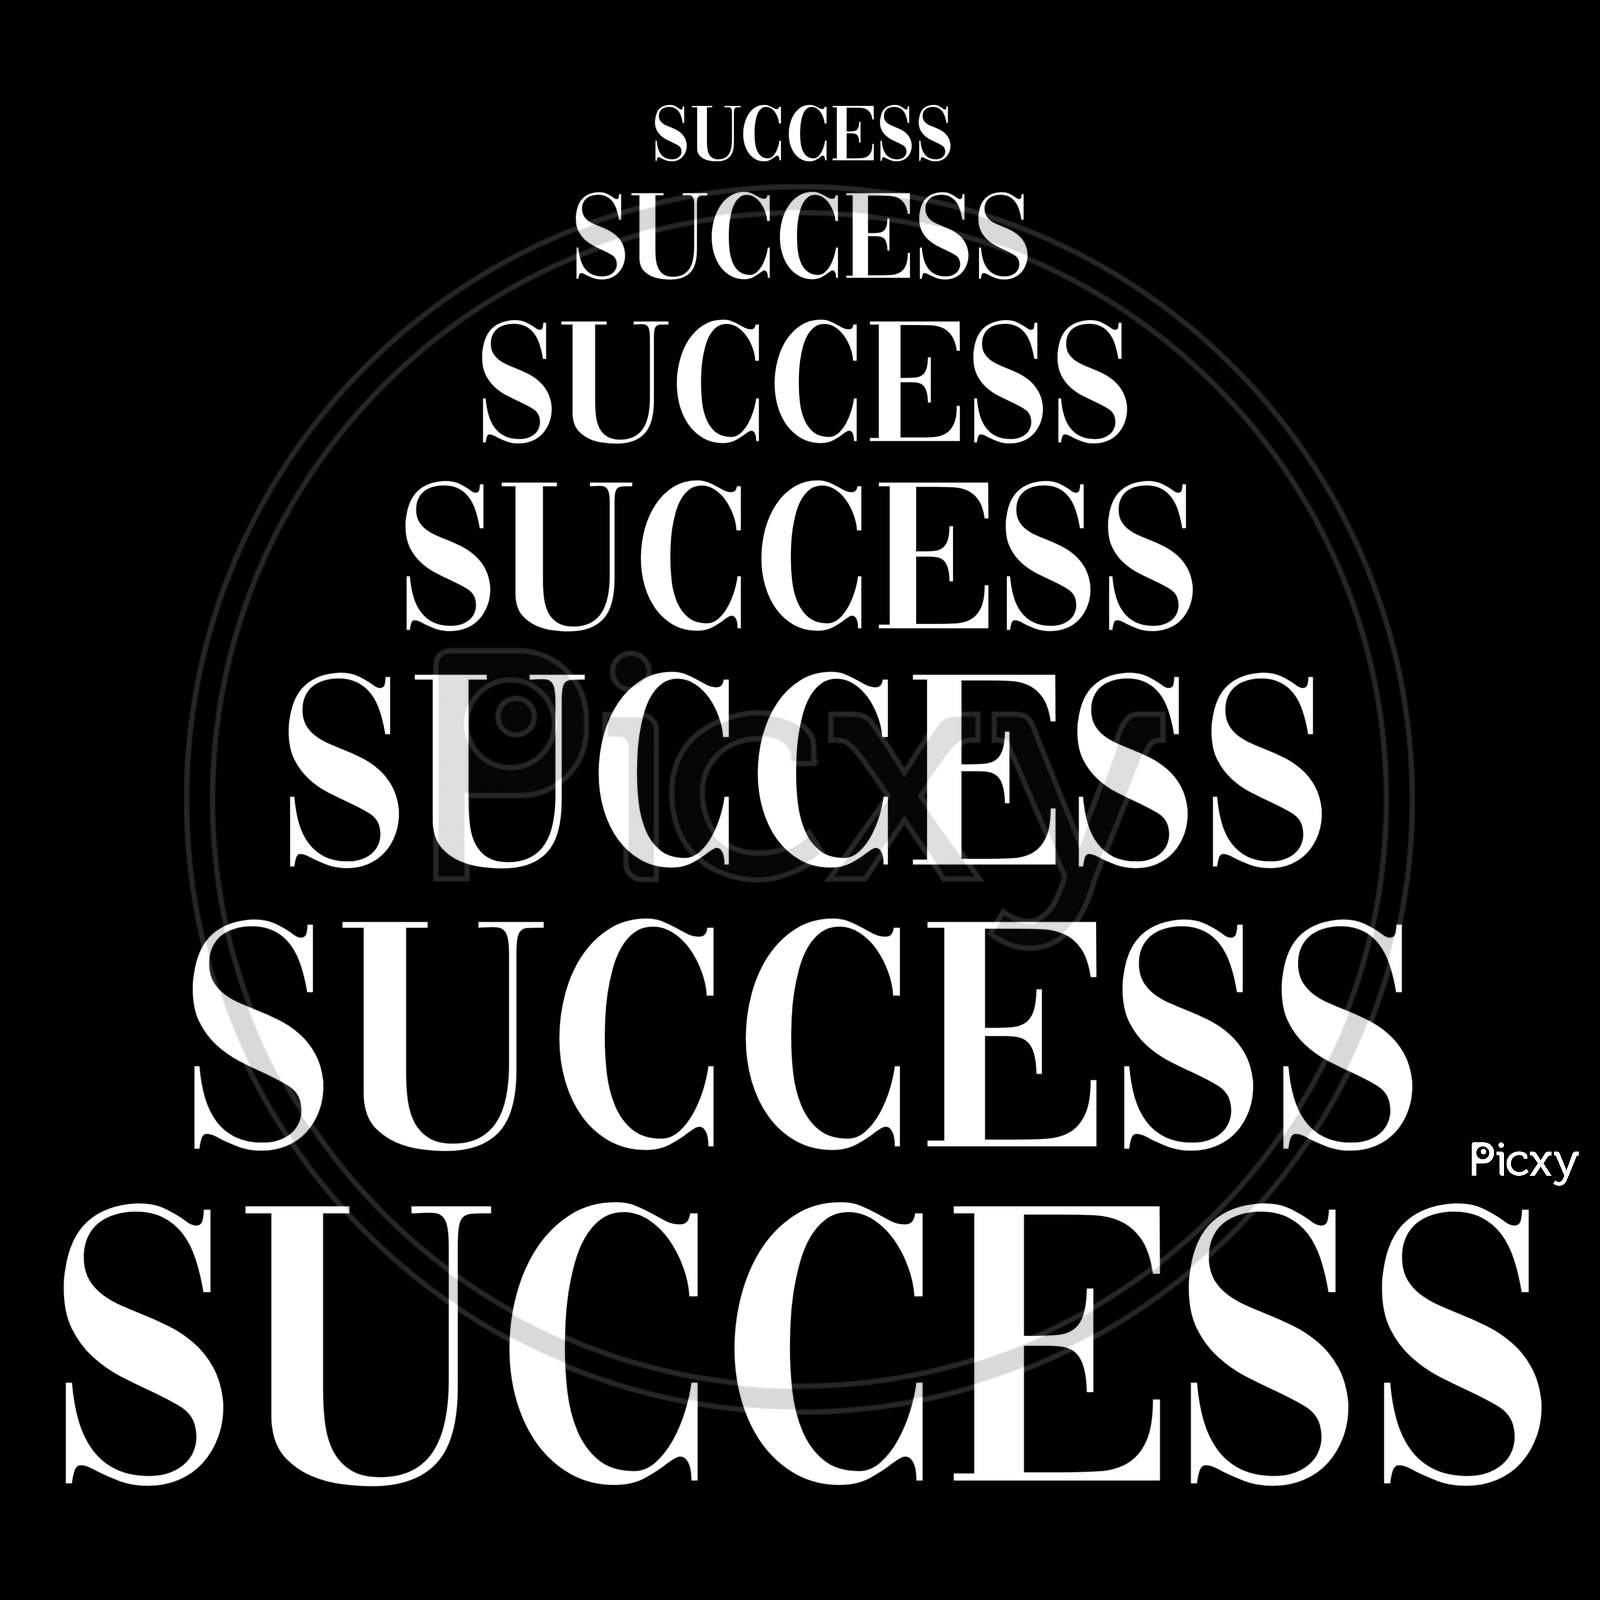 Success (black background with white color fonts)